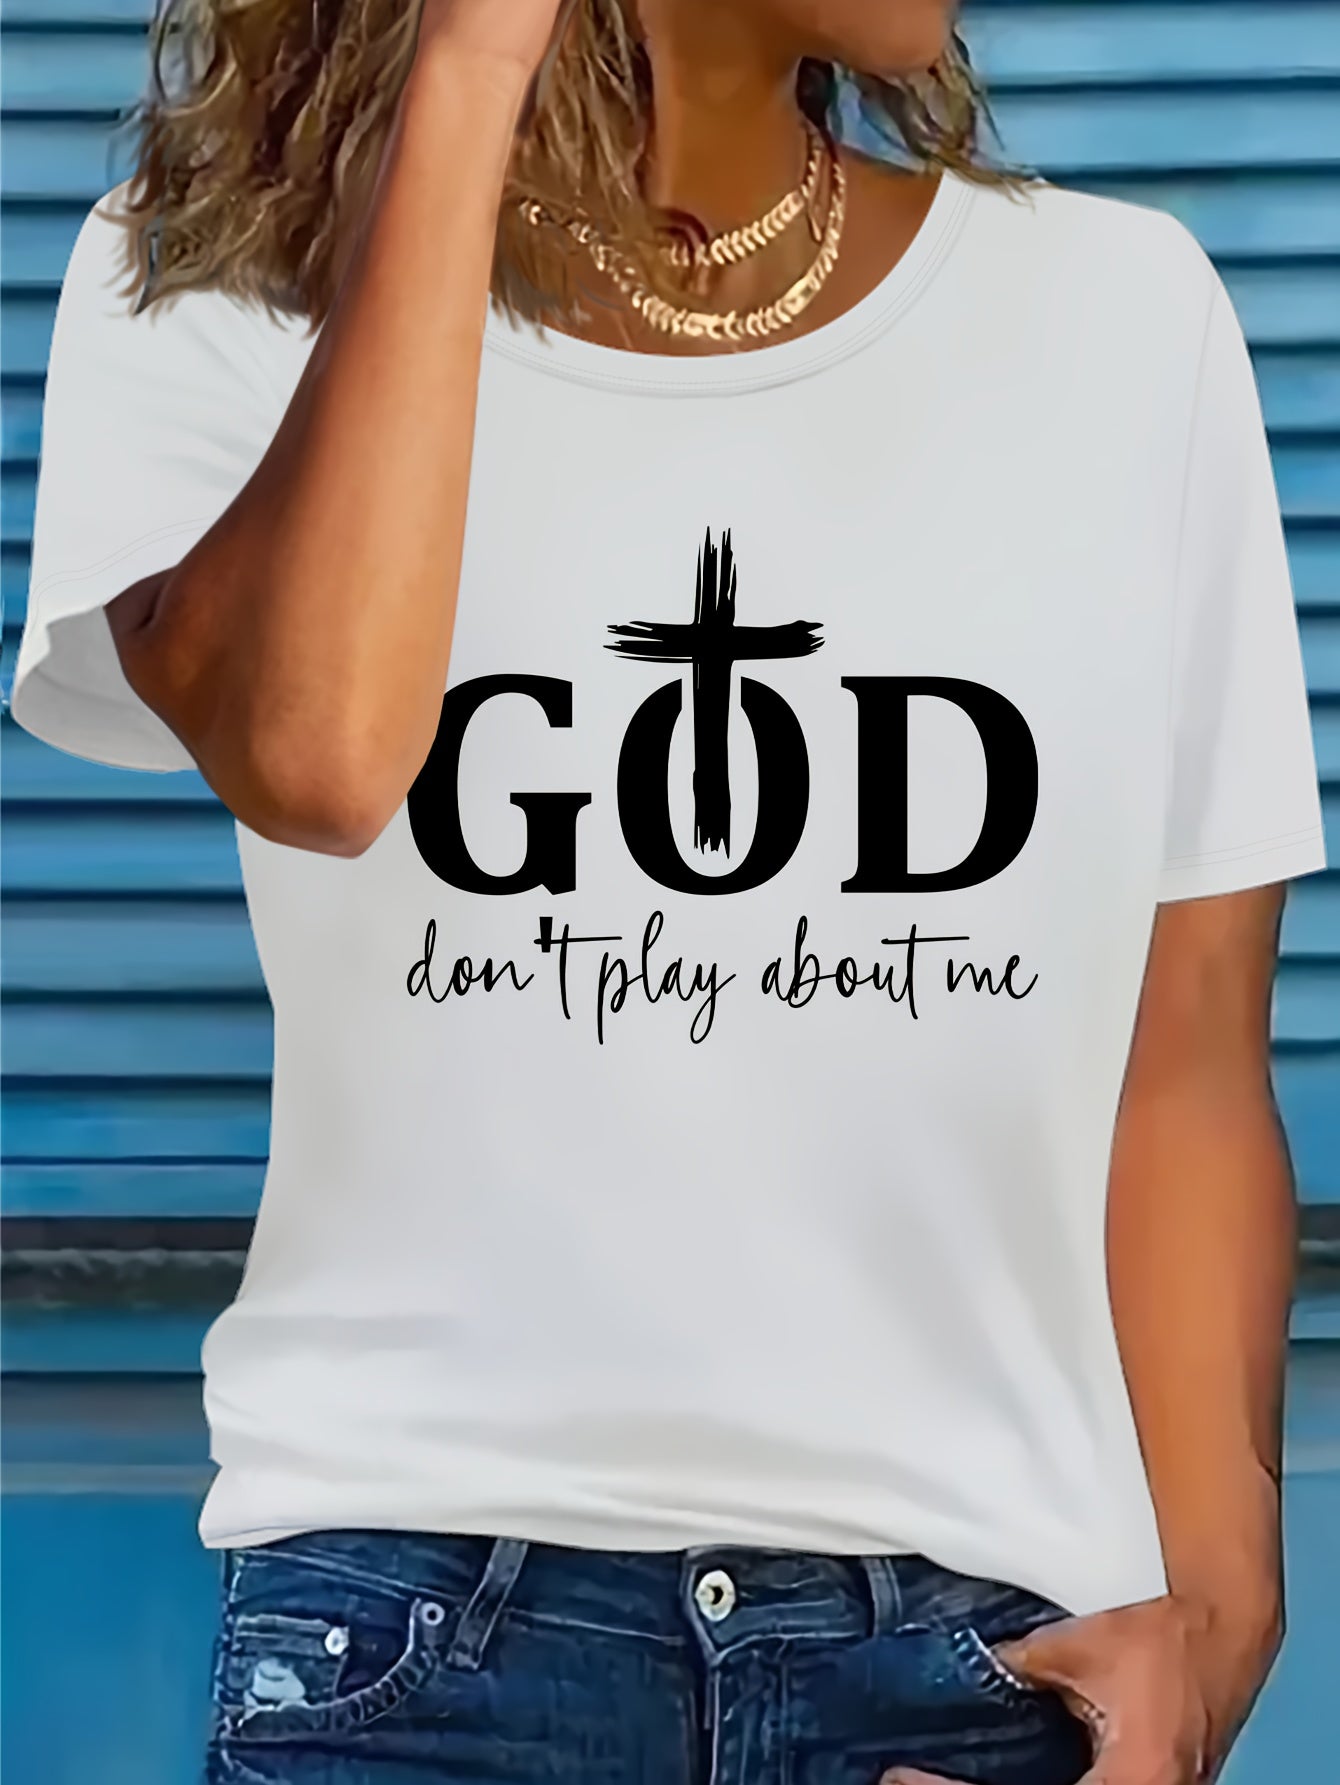 God Don't Play About Me Women's Christian T-shirt claimedbygoddesigns